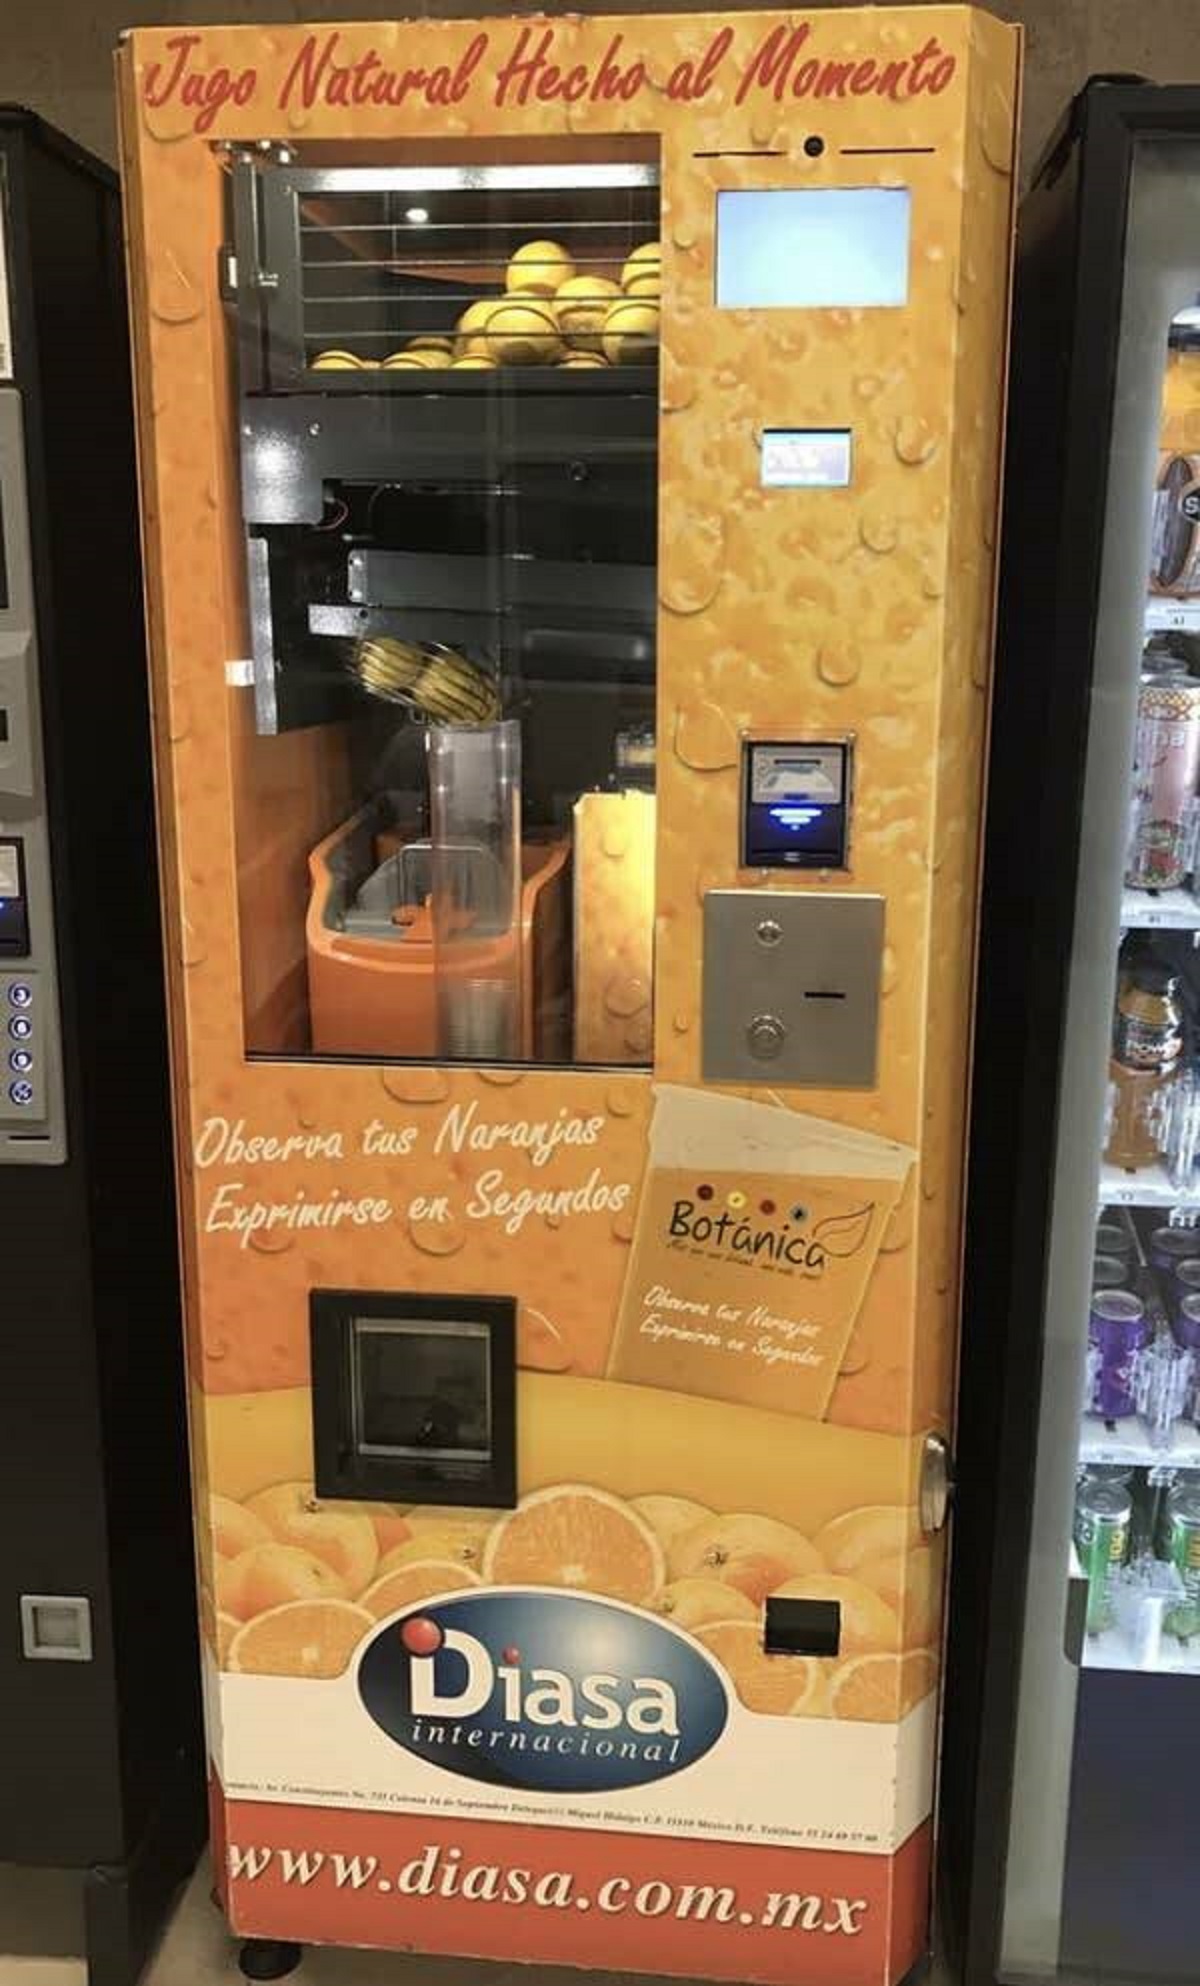 TIL you can get freshly squeezed orange juice from a VENDING MACHINE at some bus stations in Mexico.